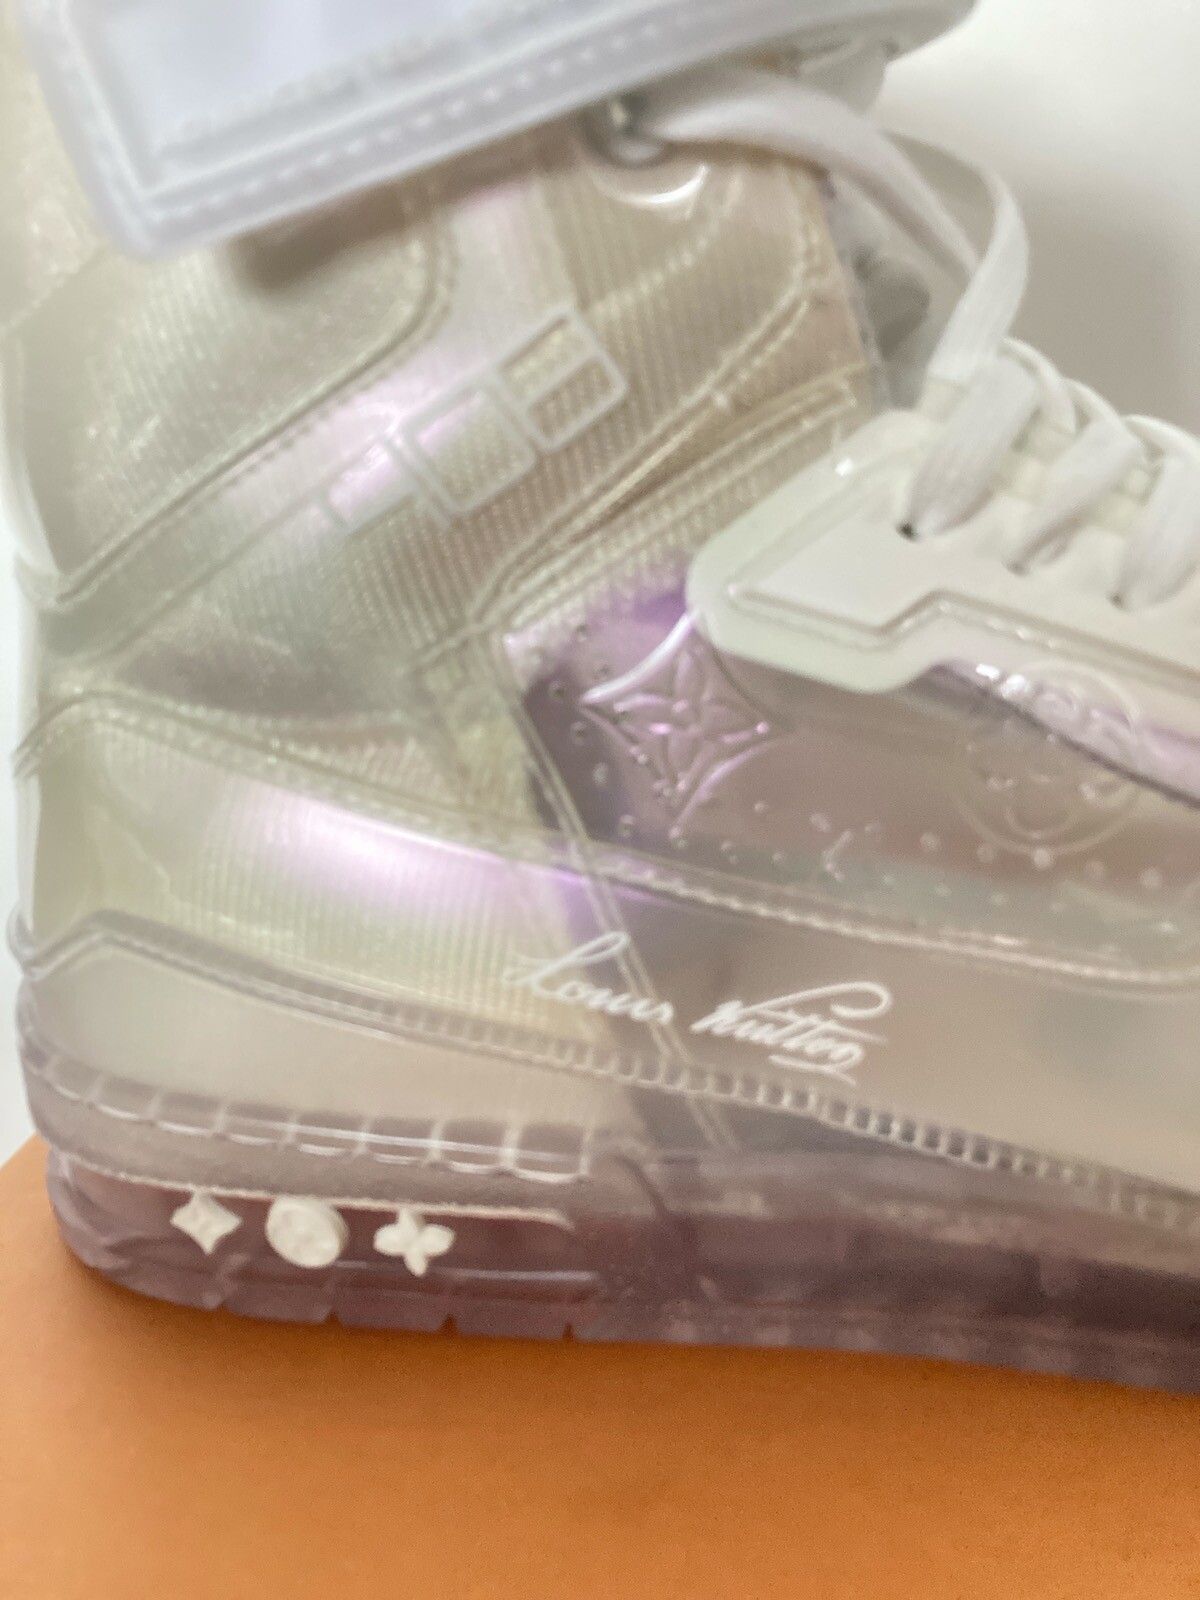 A Detailed Look at the Transparent LV 408 Trainer - JustFreshKicks